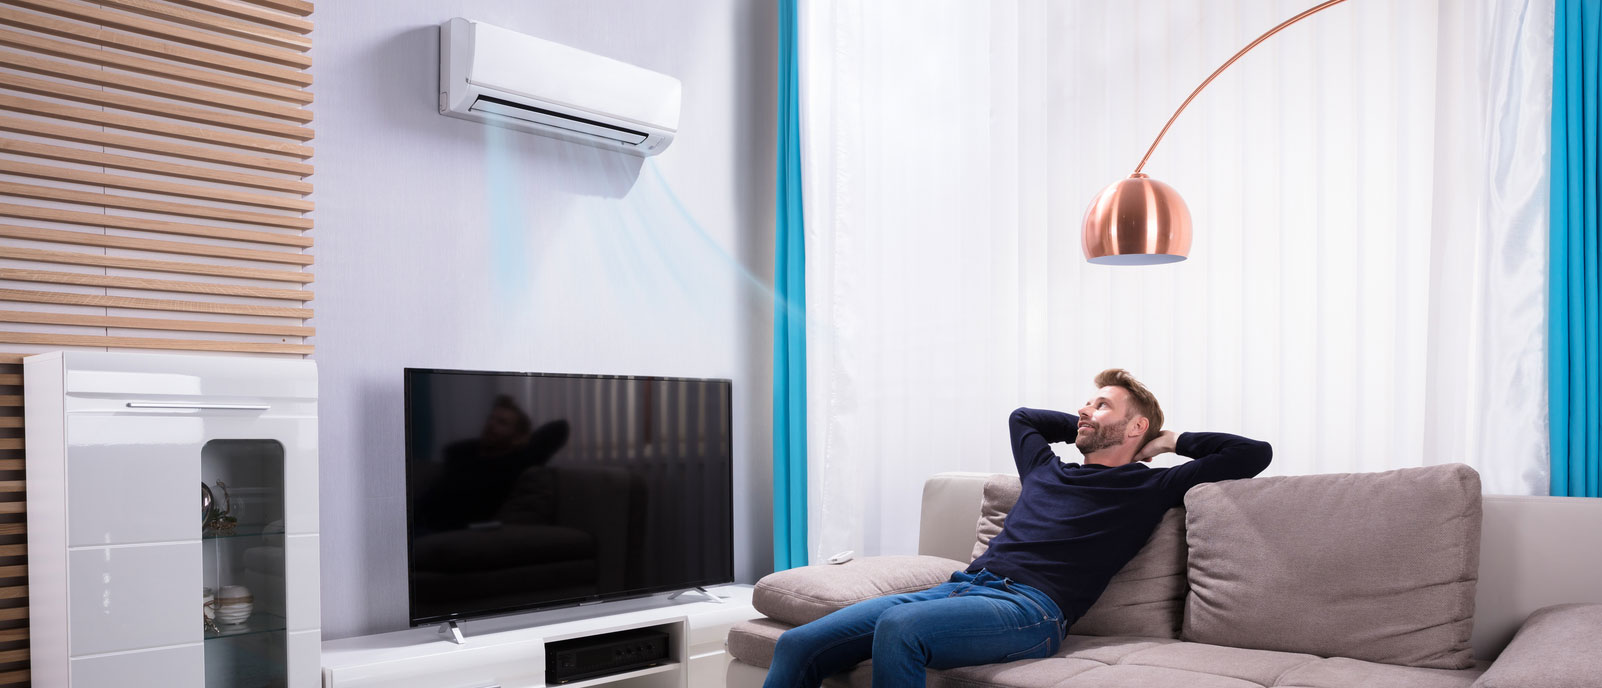 5 Advantages of Ductless Heating & Cooling